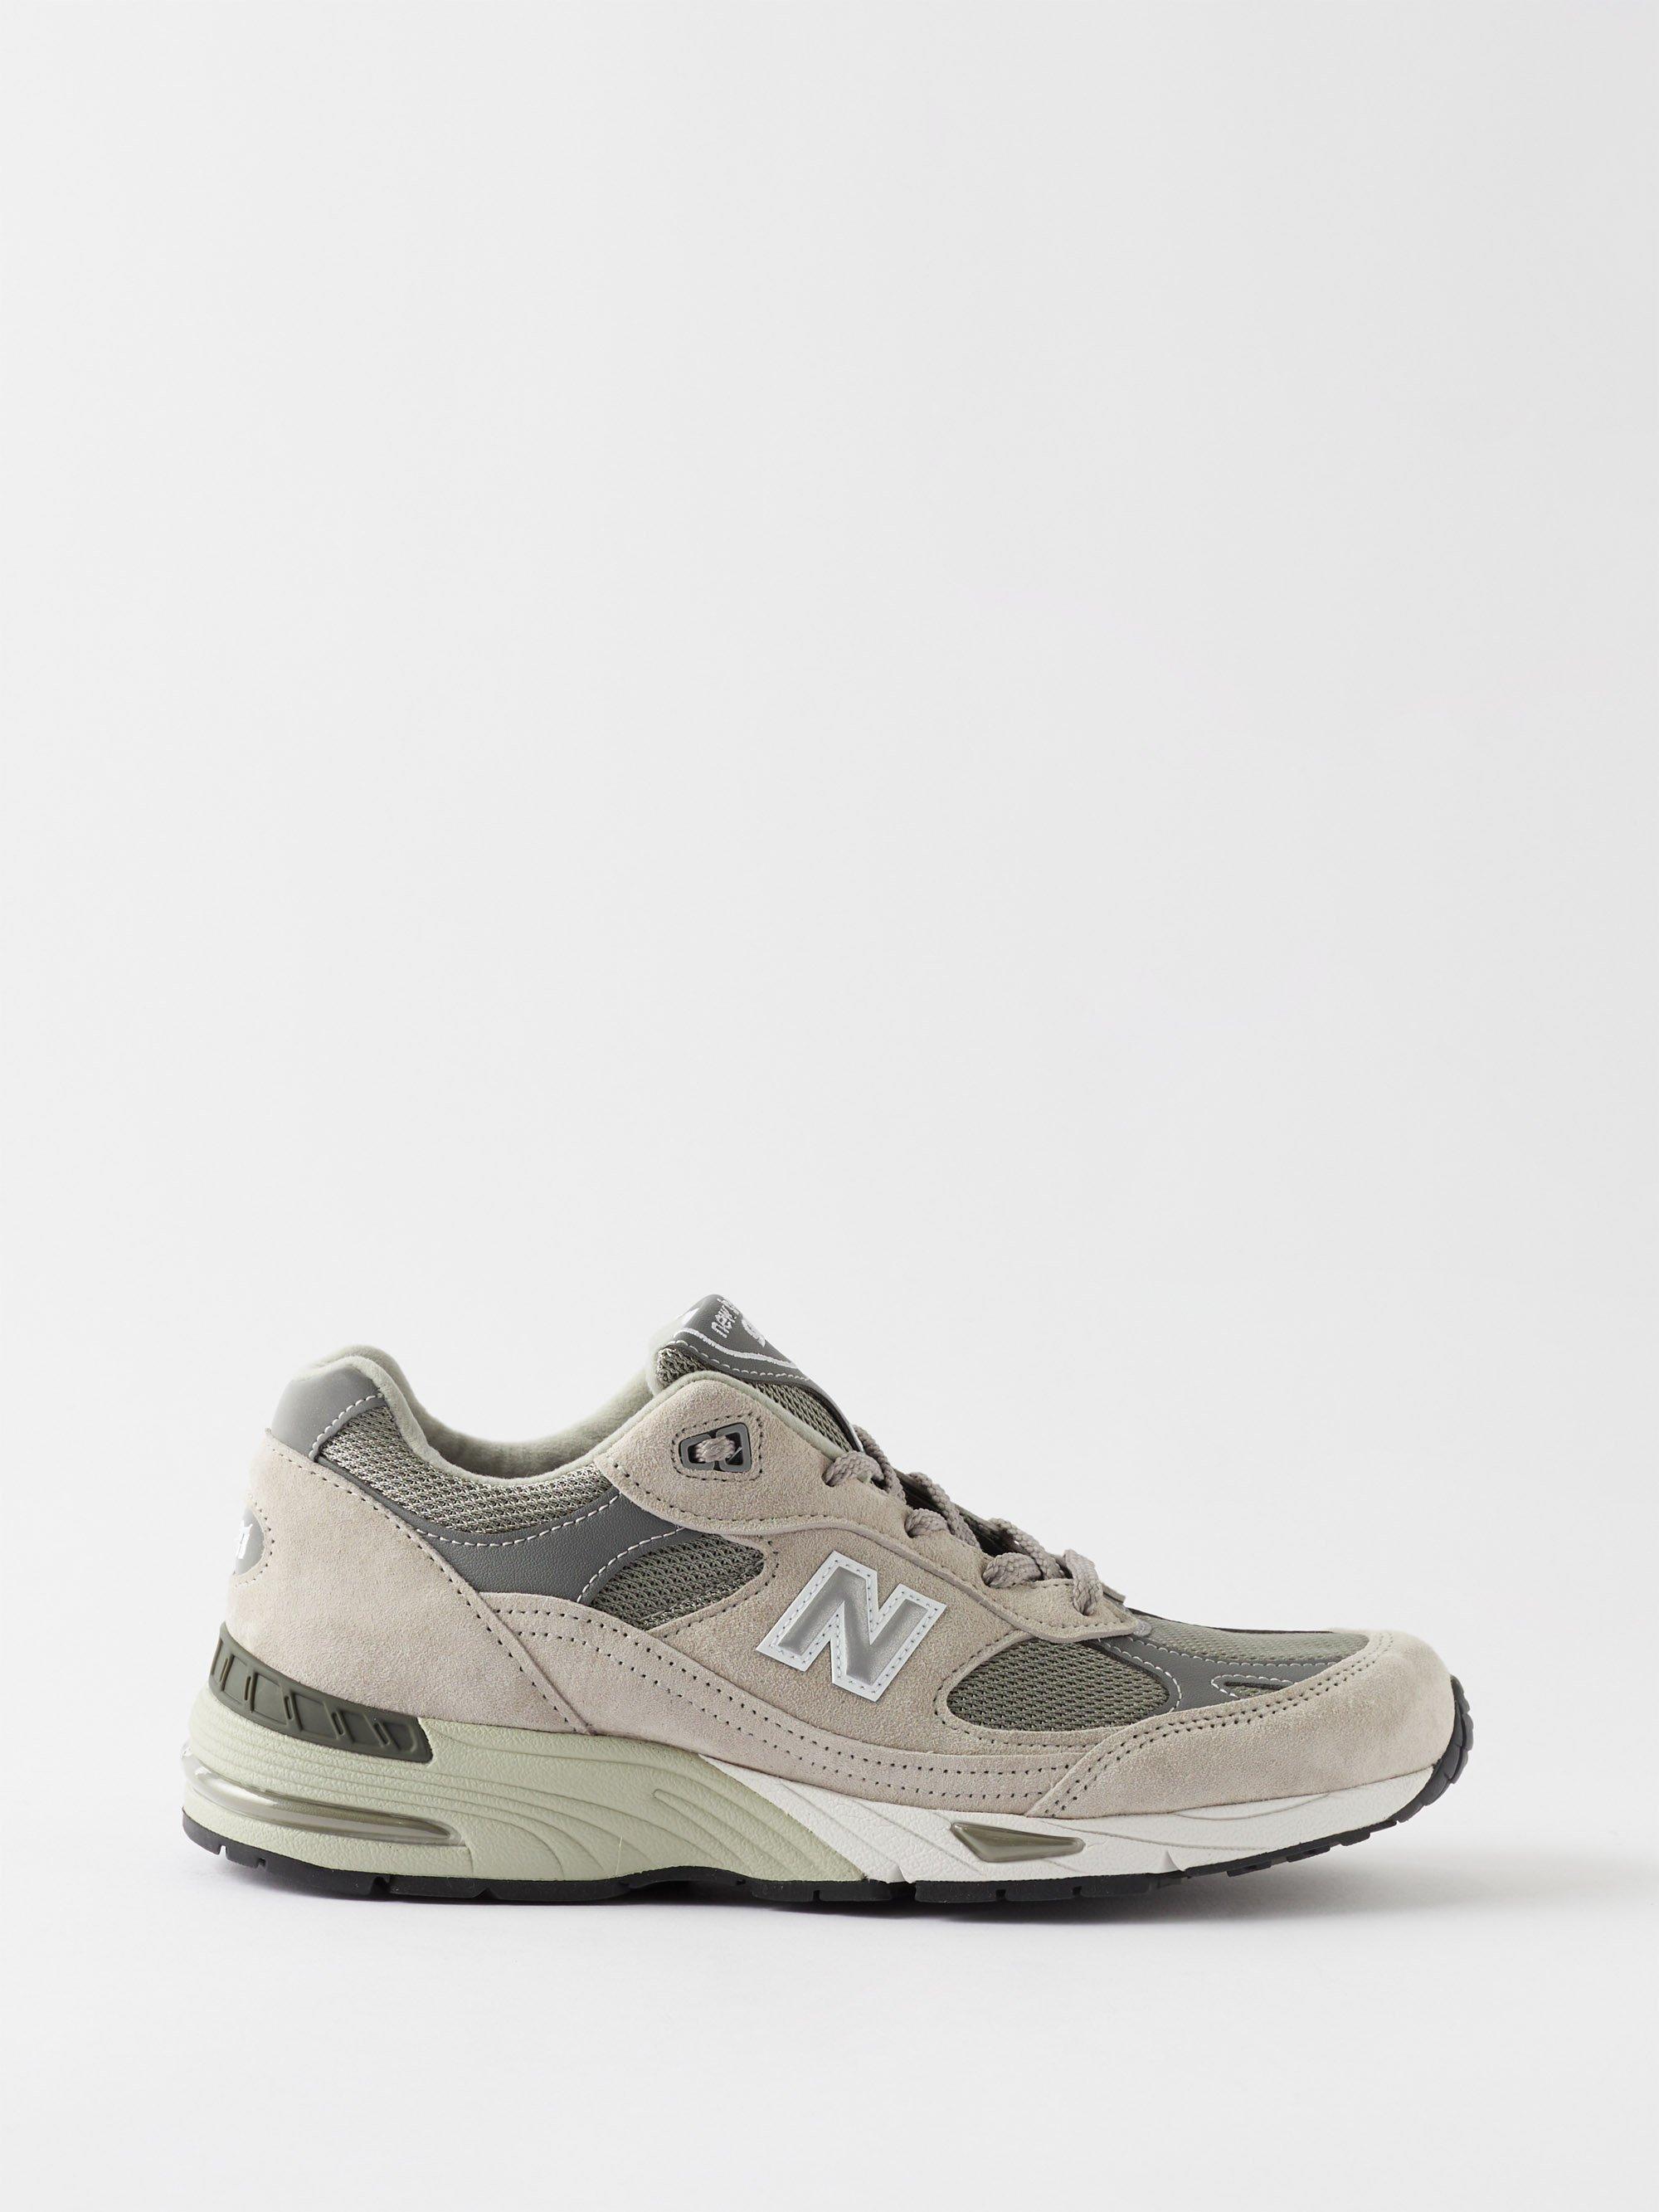 New Balance Made In Uk 991 Suede And Mesh Trainers in White | Lyst